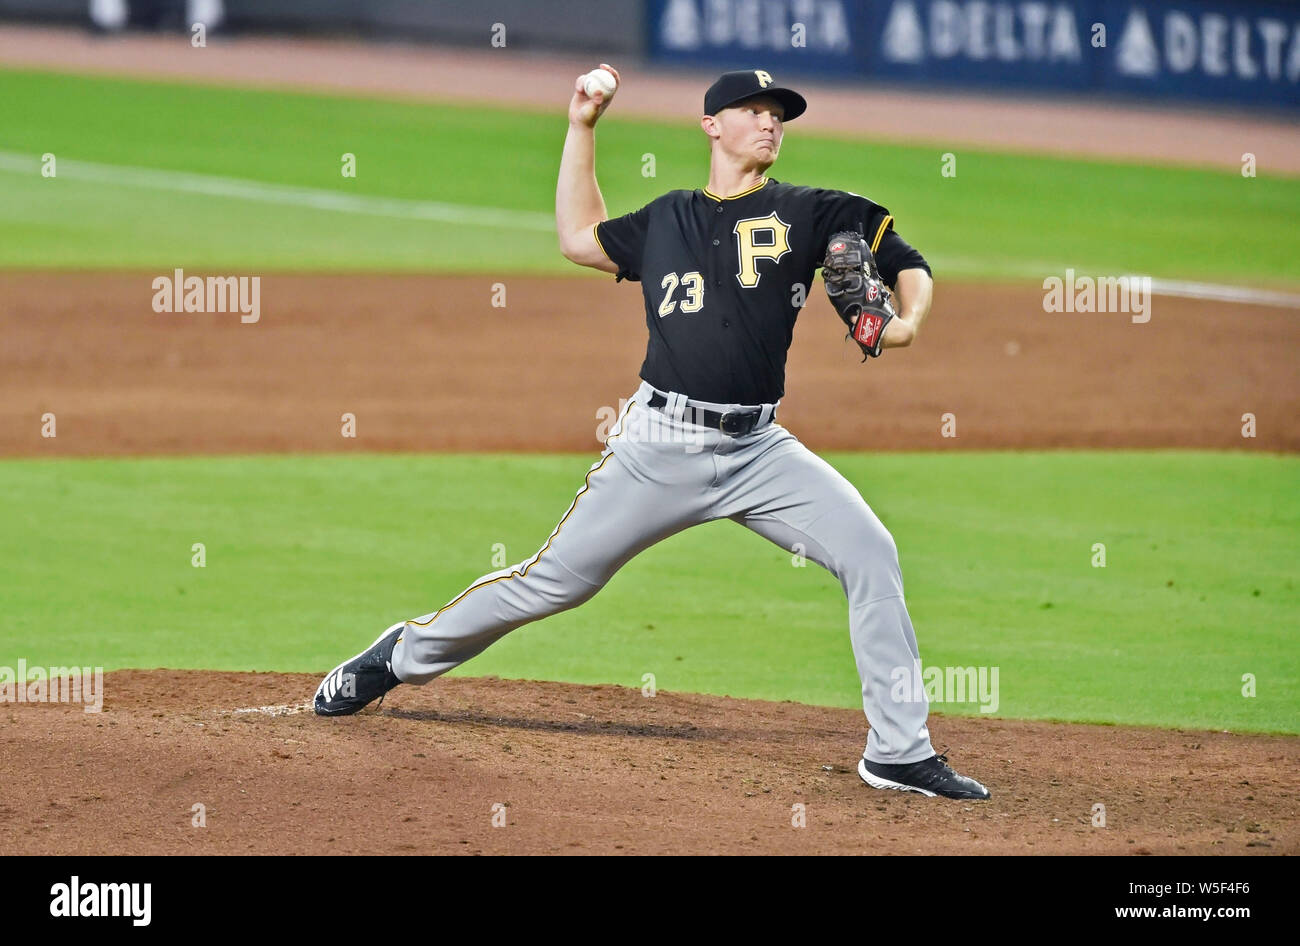 Atlanta, GA, USA. 12th June, 2019. Pittsburgh Pirates pitcher Mitch Keller delivers a pitch during the third inning of a MLB game against the Atlanta Braves at SunTrust Park in Atlanta, GA. Austin McAfee/CSM/Alamy Live News Stock Photo